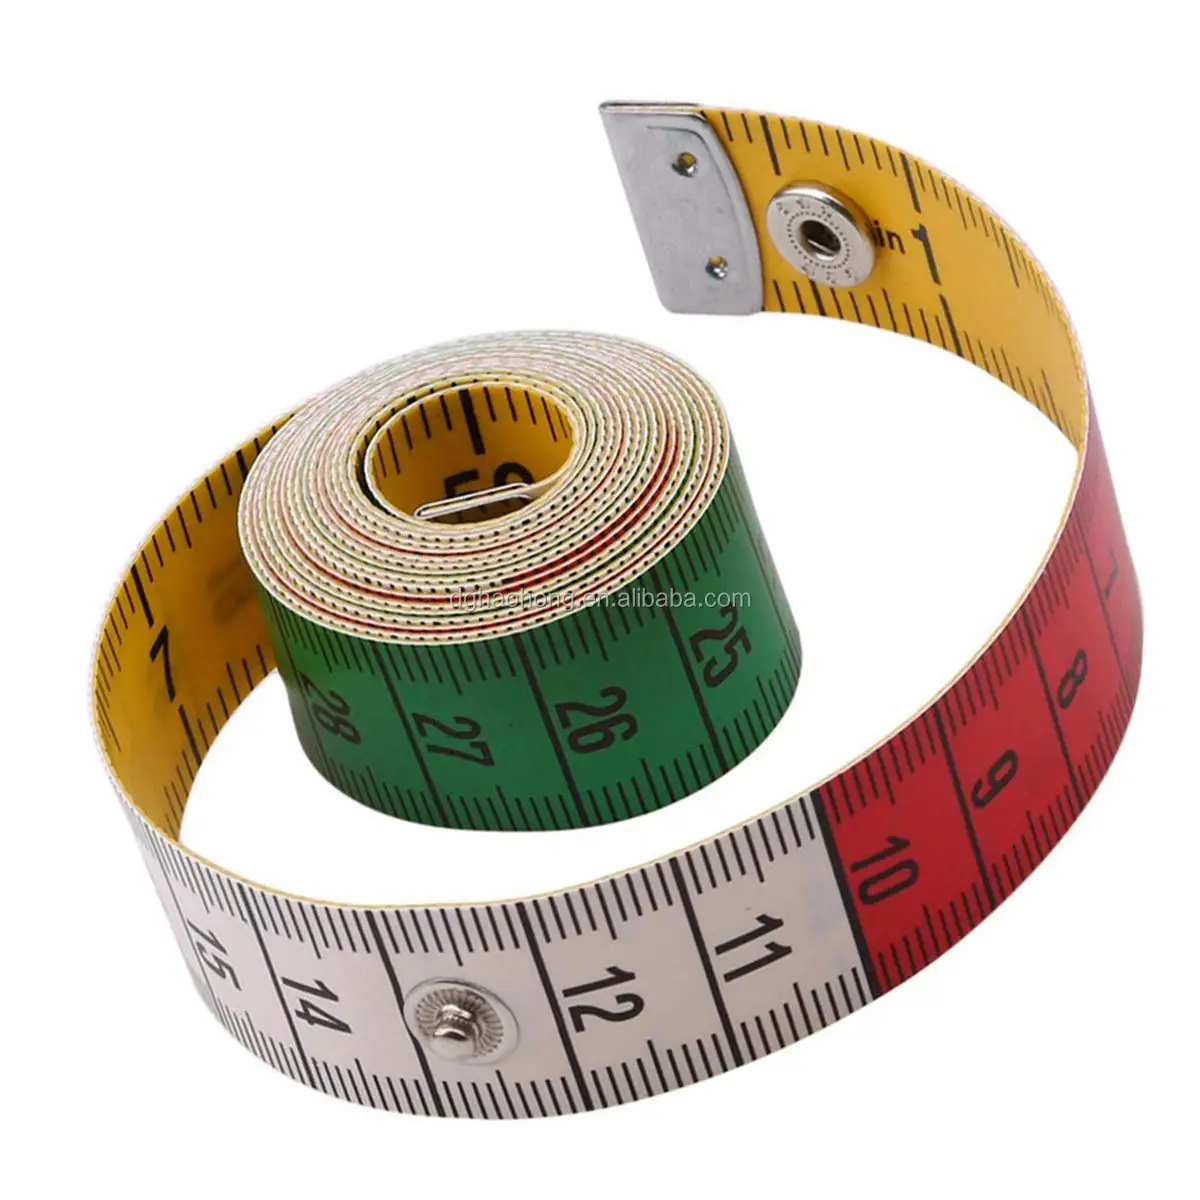 Braylin 5 Piece Body Measuring Tape Ruler Sewing Tailor Double Sided Scale Measure Tape Soft Flexible，Tape Measure 60Inch 150 cm Colorful